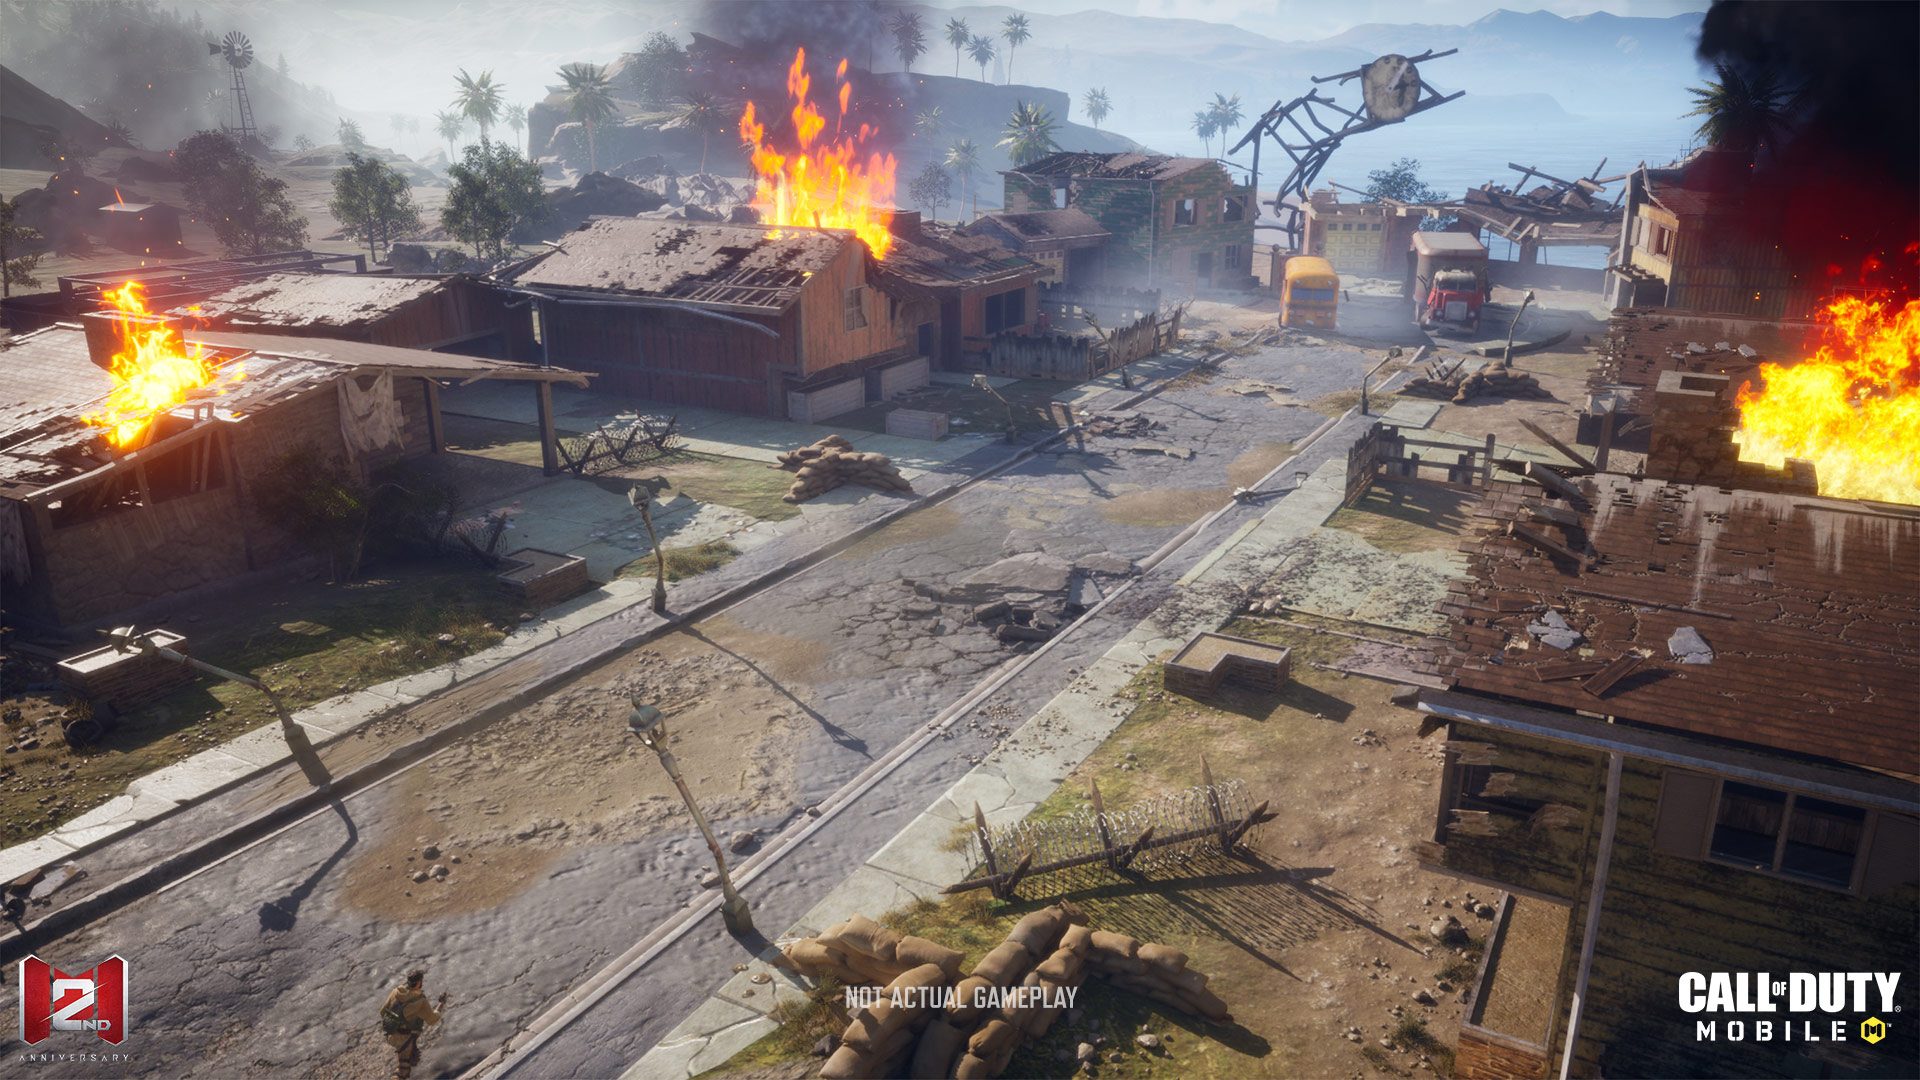 Call of Duty: Mobile - A Closer Look at the New Battle Royale ‘Blackout’ Map